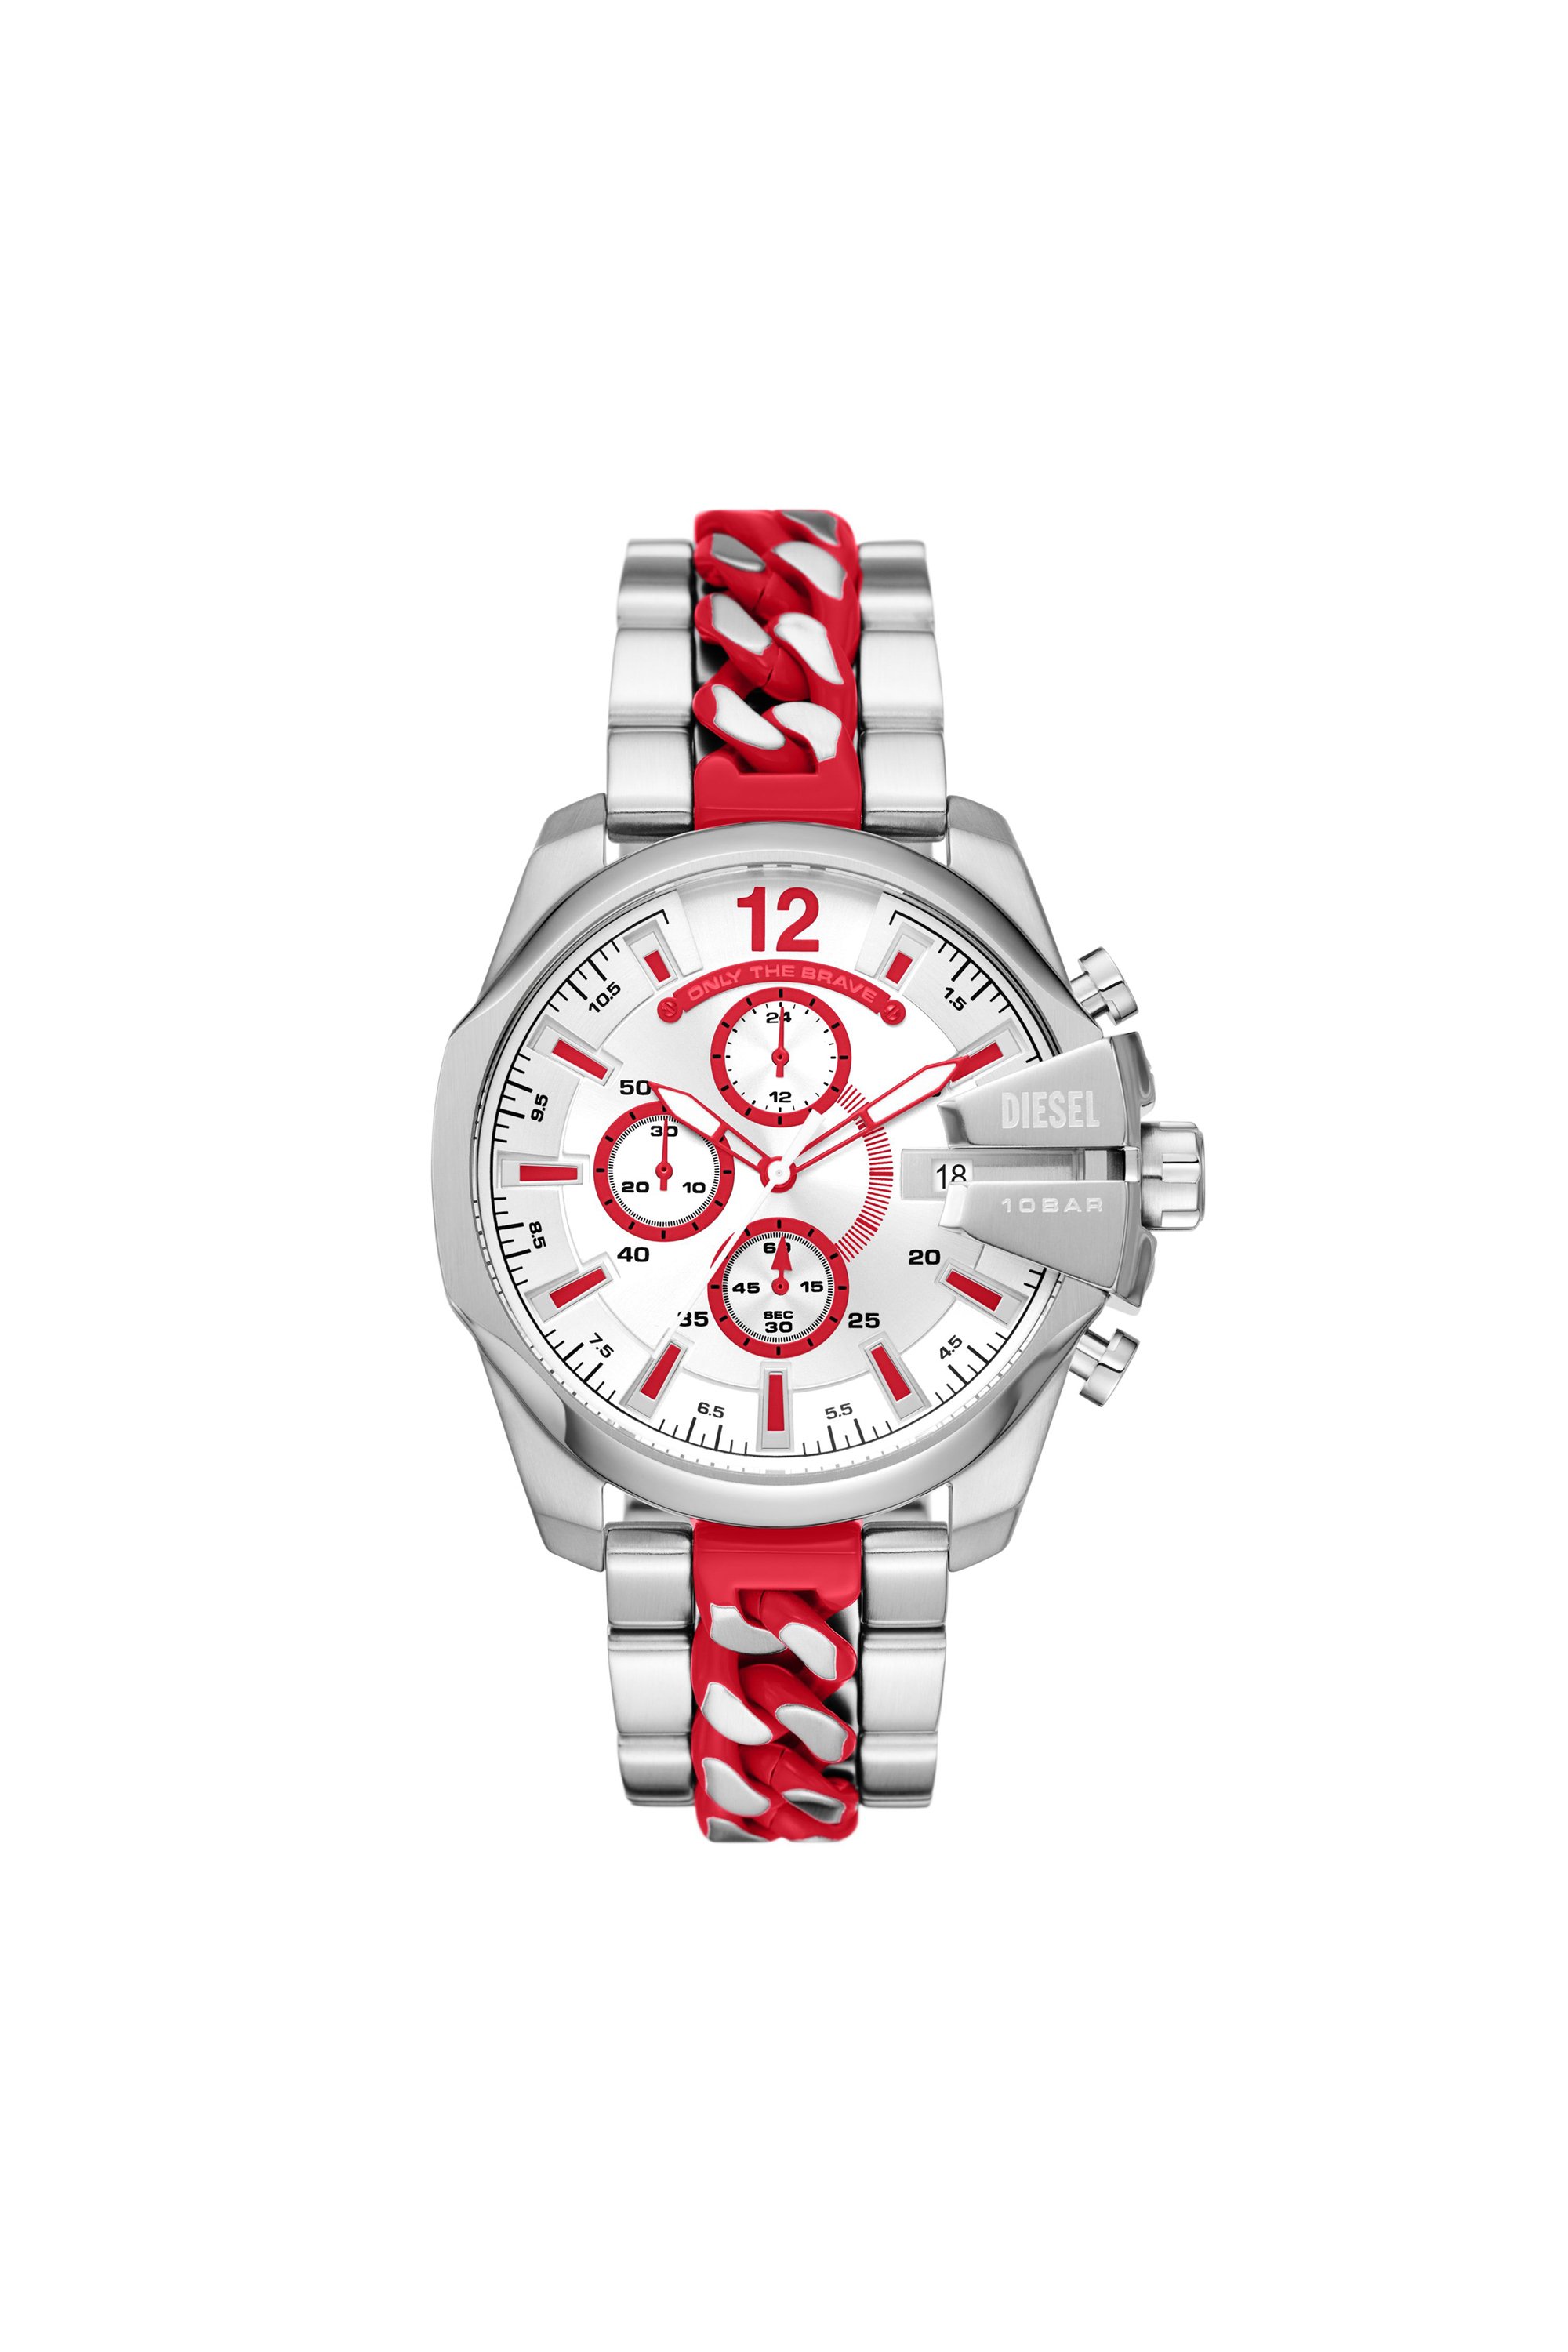 Diesel Limited Edition Baby Chief Stainless Steel Watch In Argento